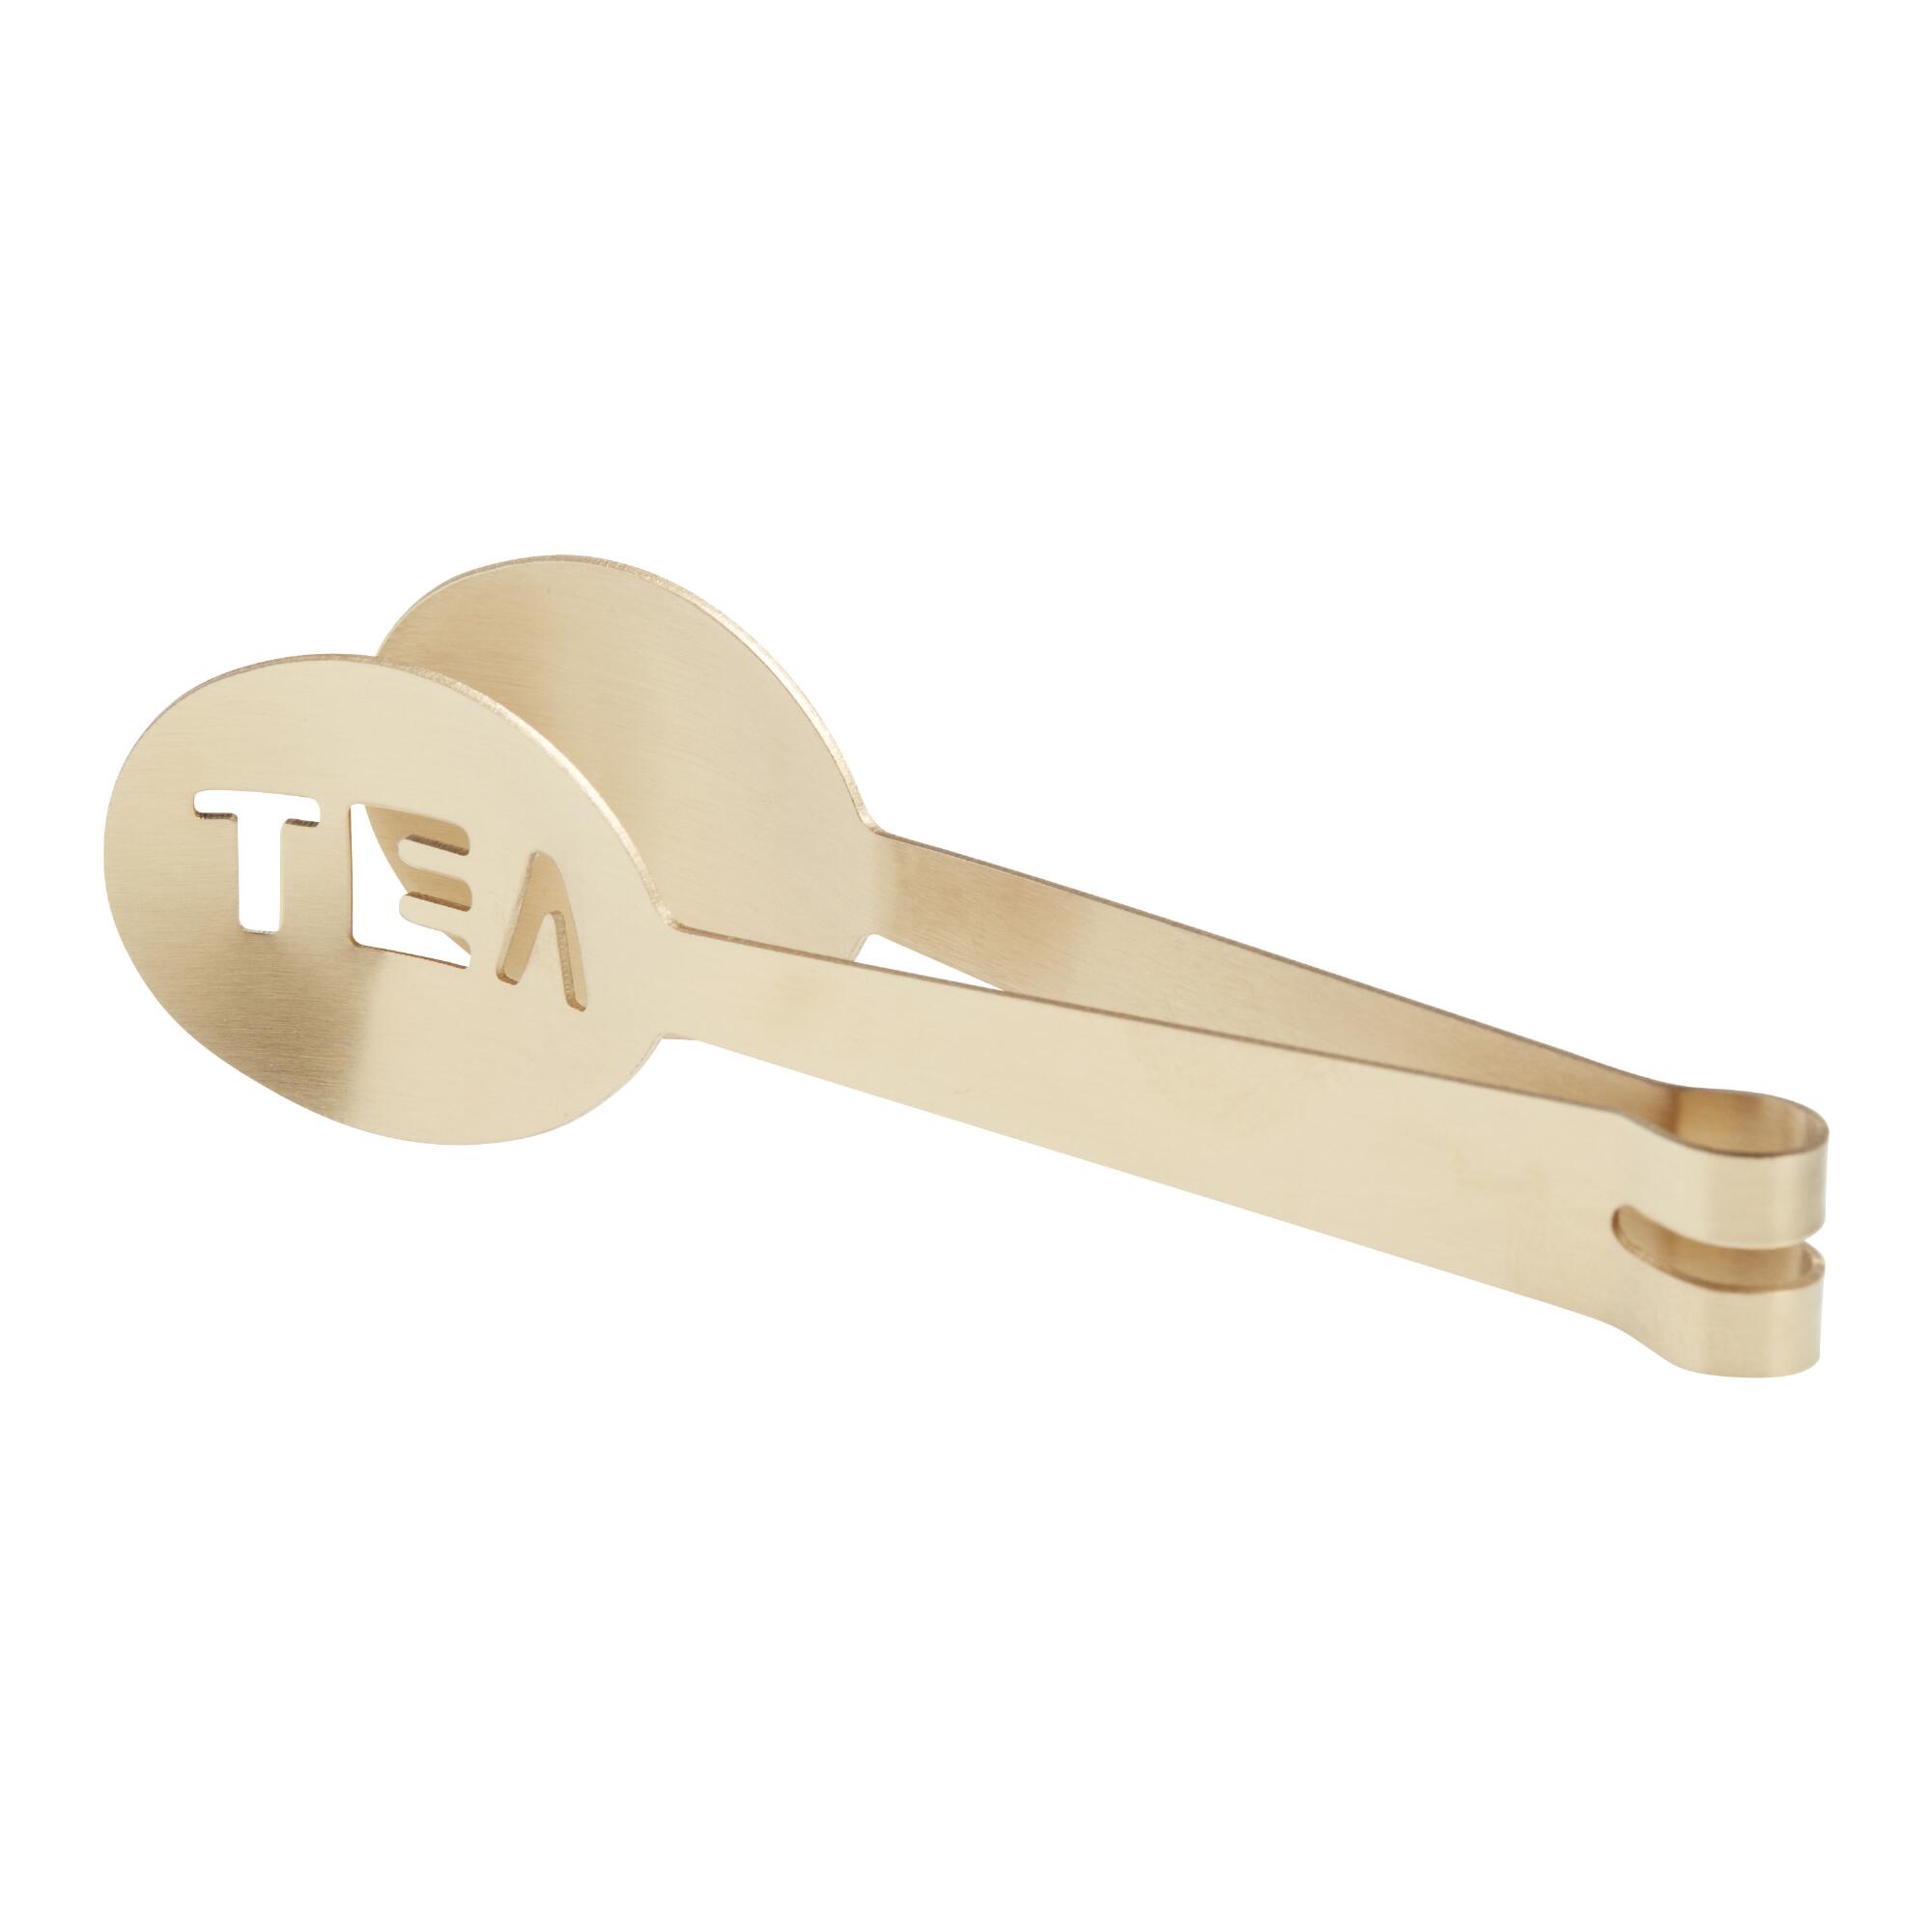 Gold Stainless Steel Tea Tongs by World Market